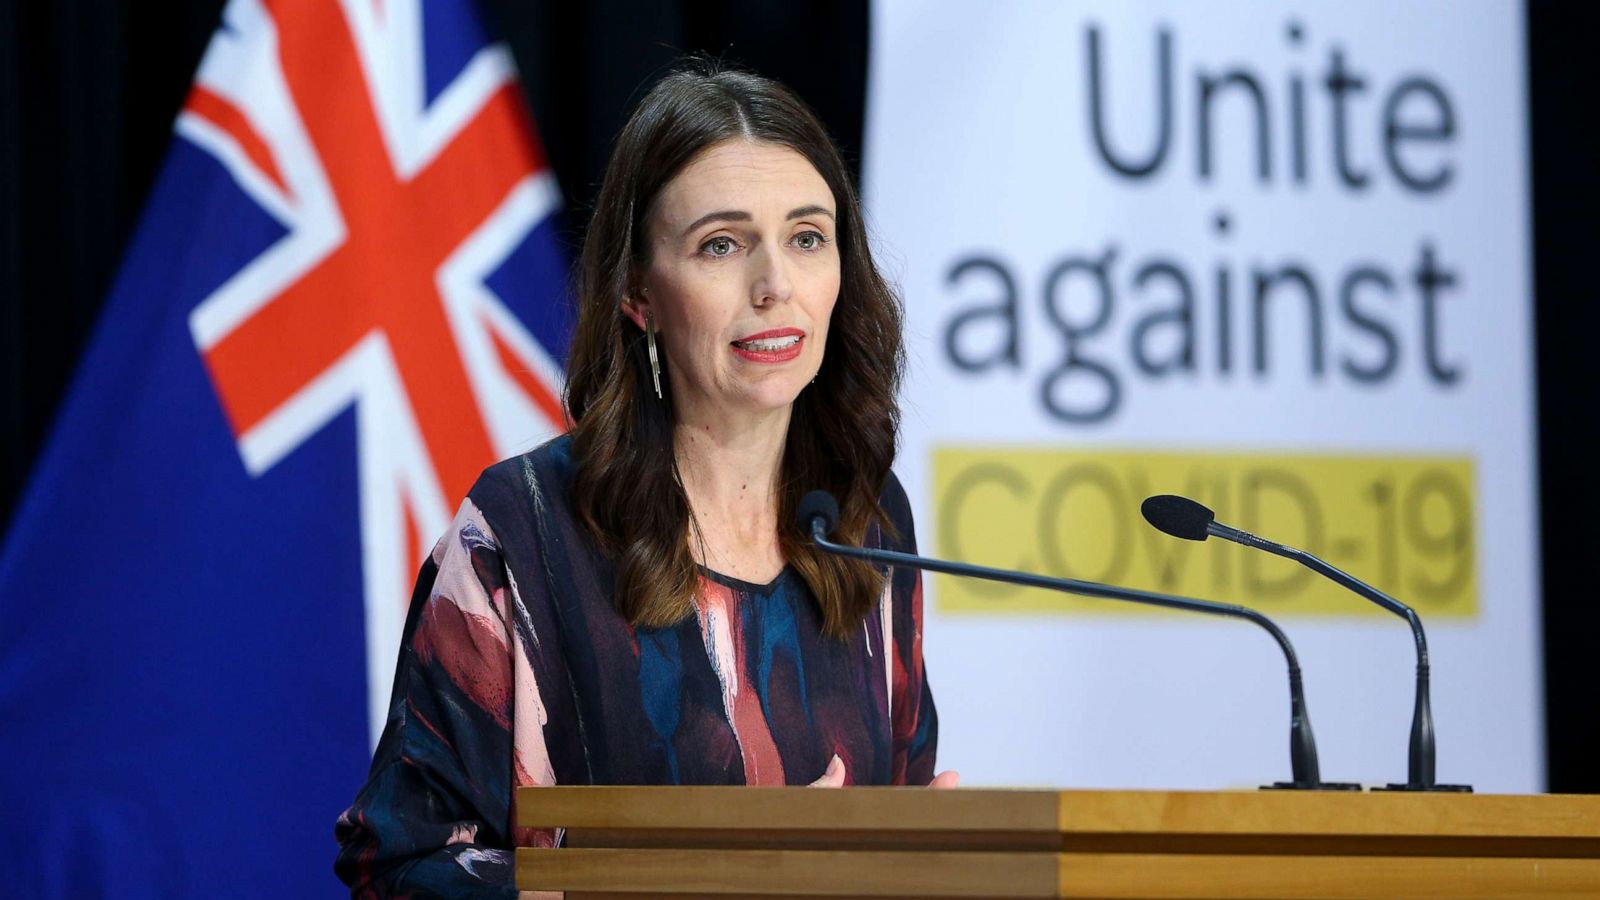 New Zealand Prime Minister Jacinda Ardern Suggests 4 Day Workweek To Recover From Pandemic